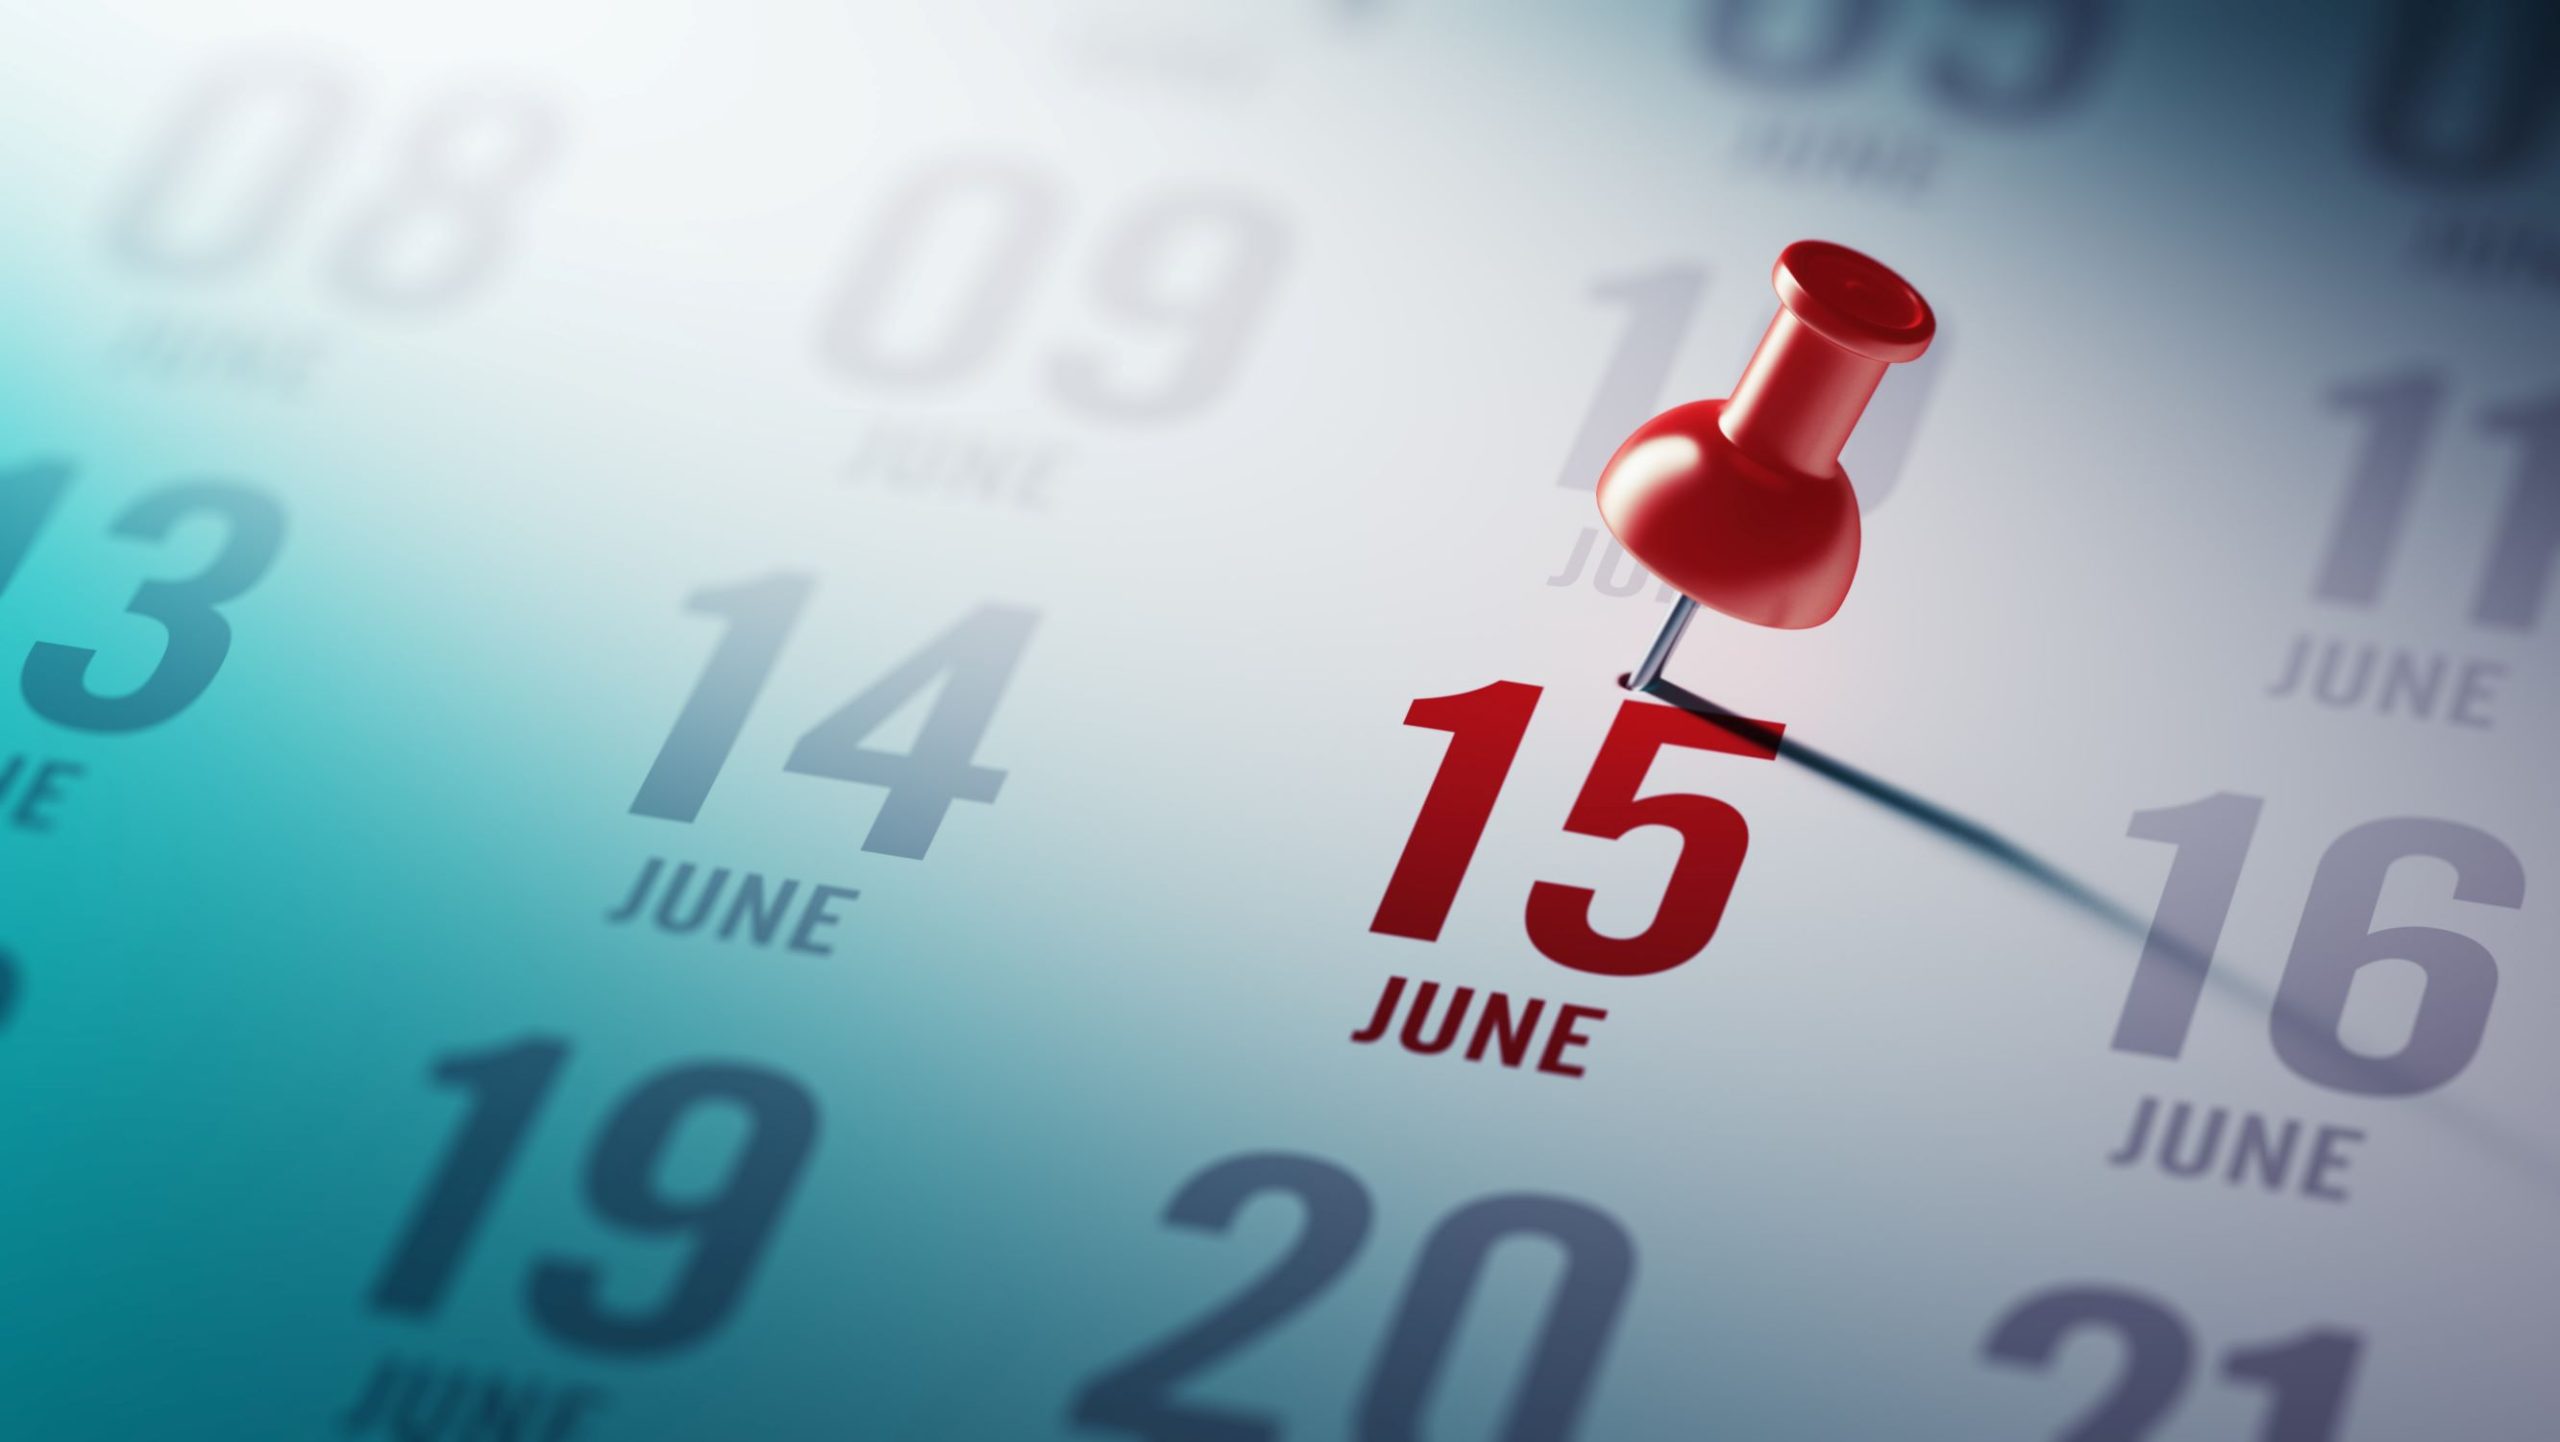 Tax Alert: NJ/NY Estimated Tax Payments Due on June 15, 2020